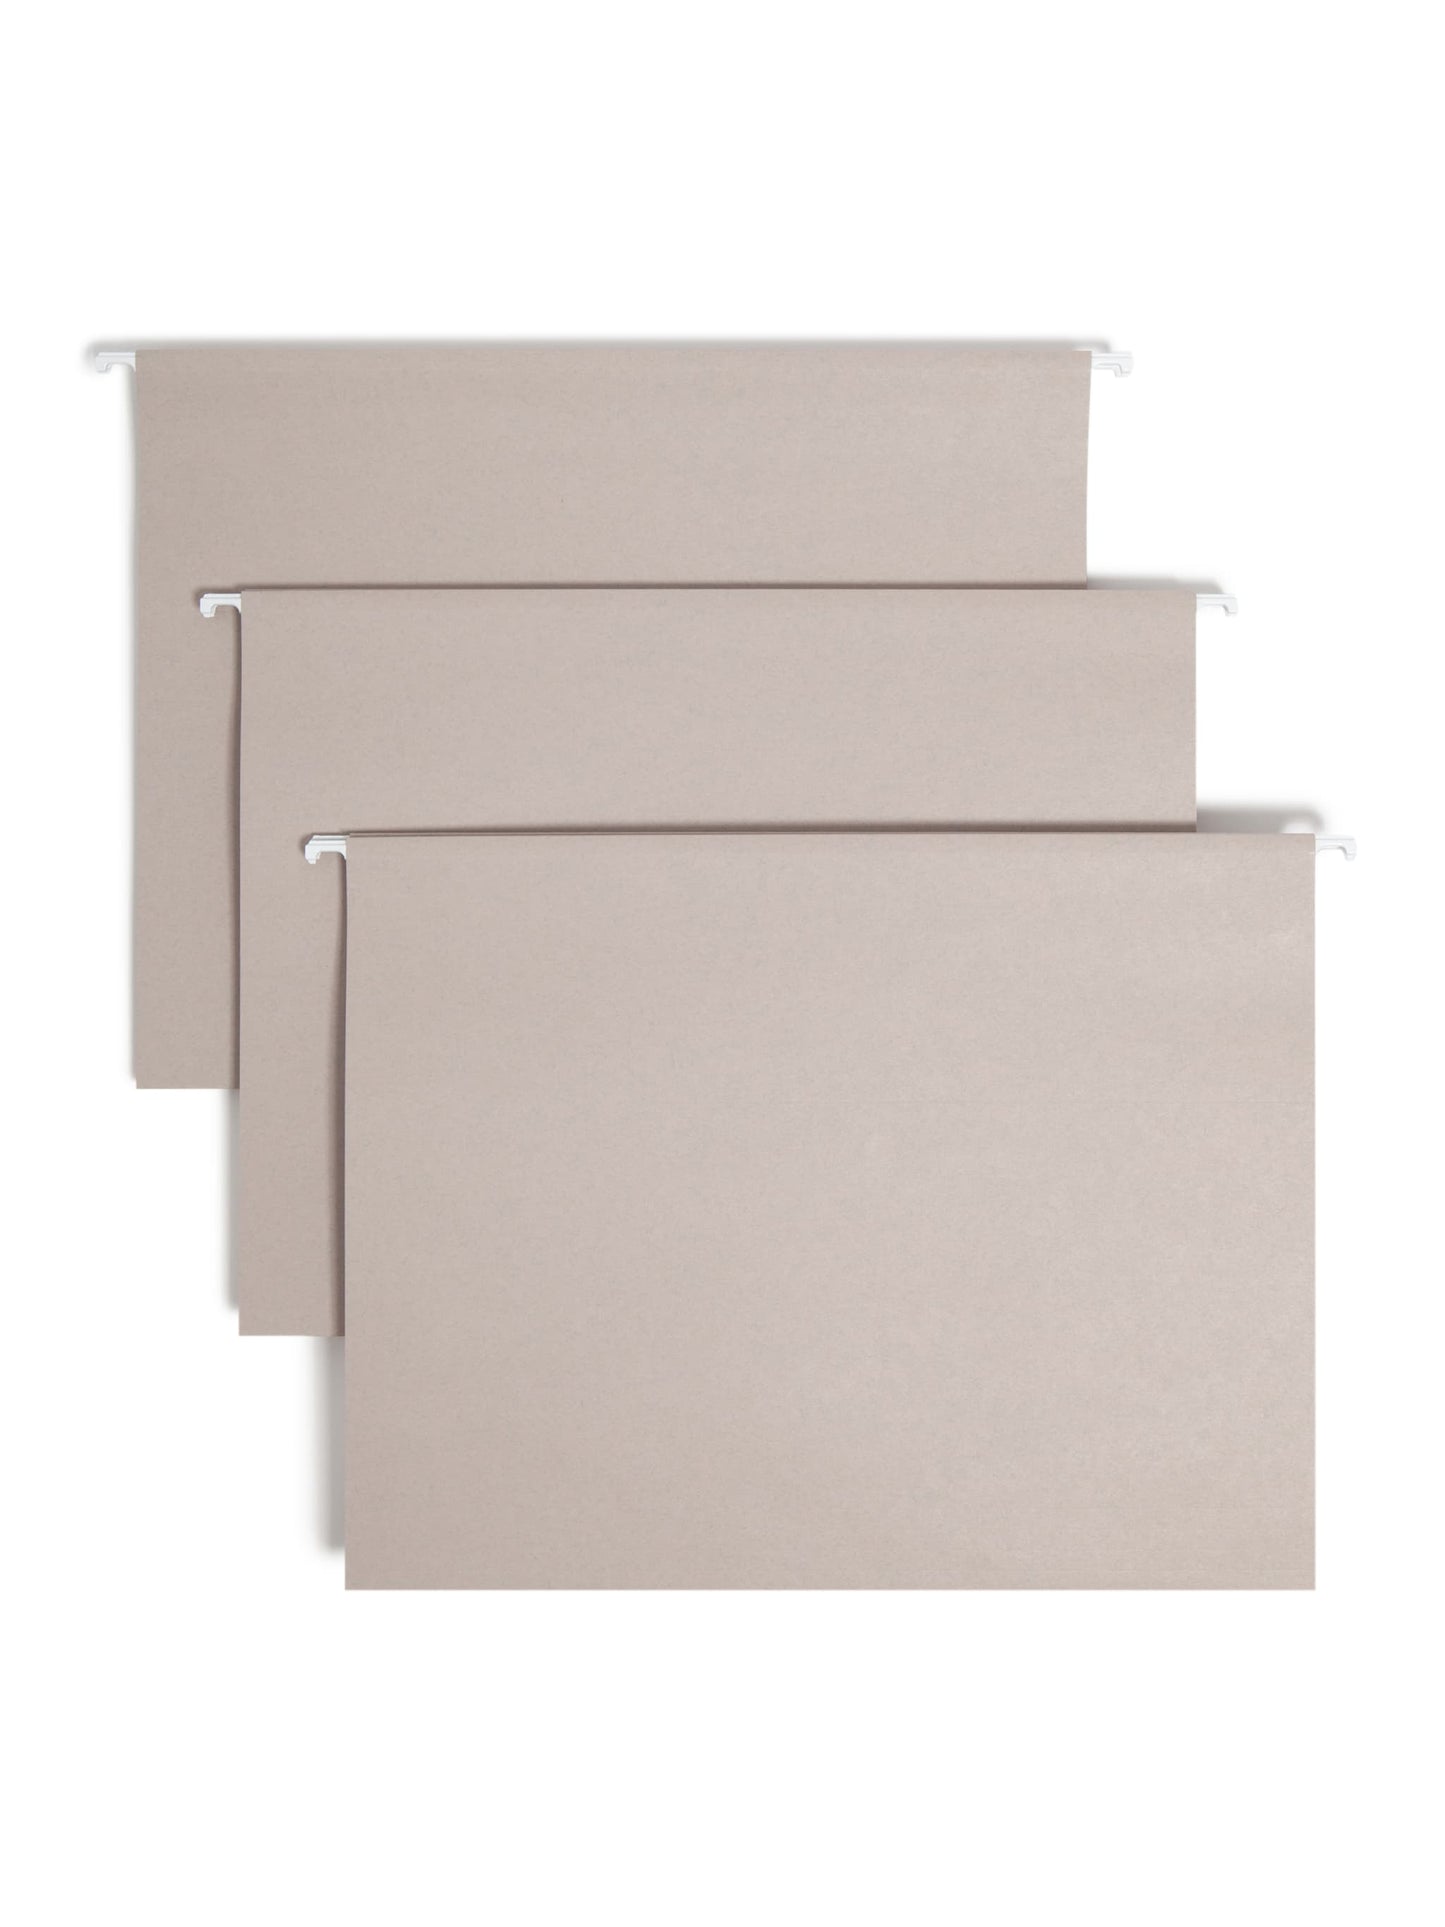 TUFF® Hanging File Folders with Easy Slide® Tabs, Gray Color, Letter Size, Set of 18, 086486640923